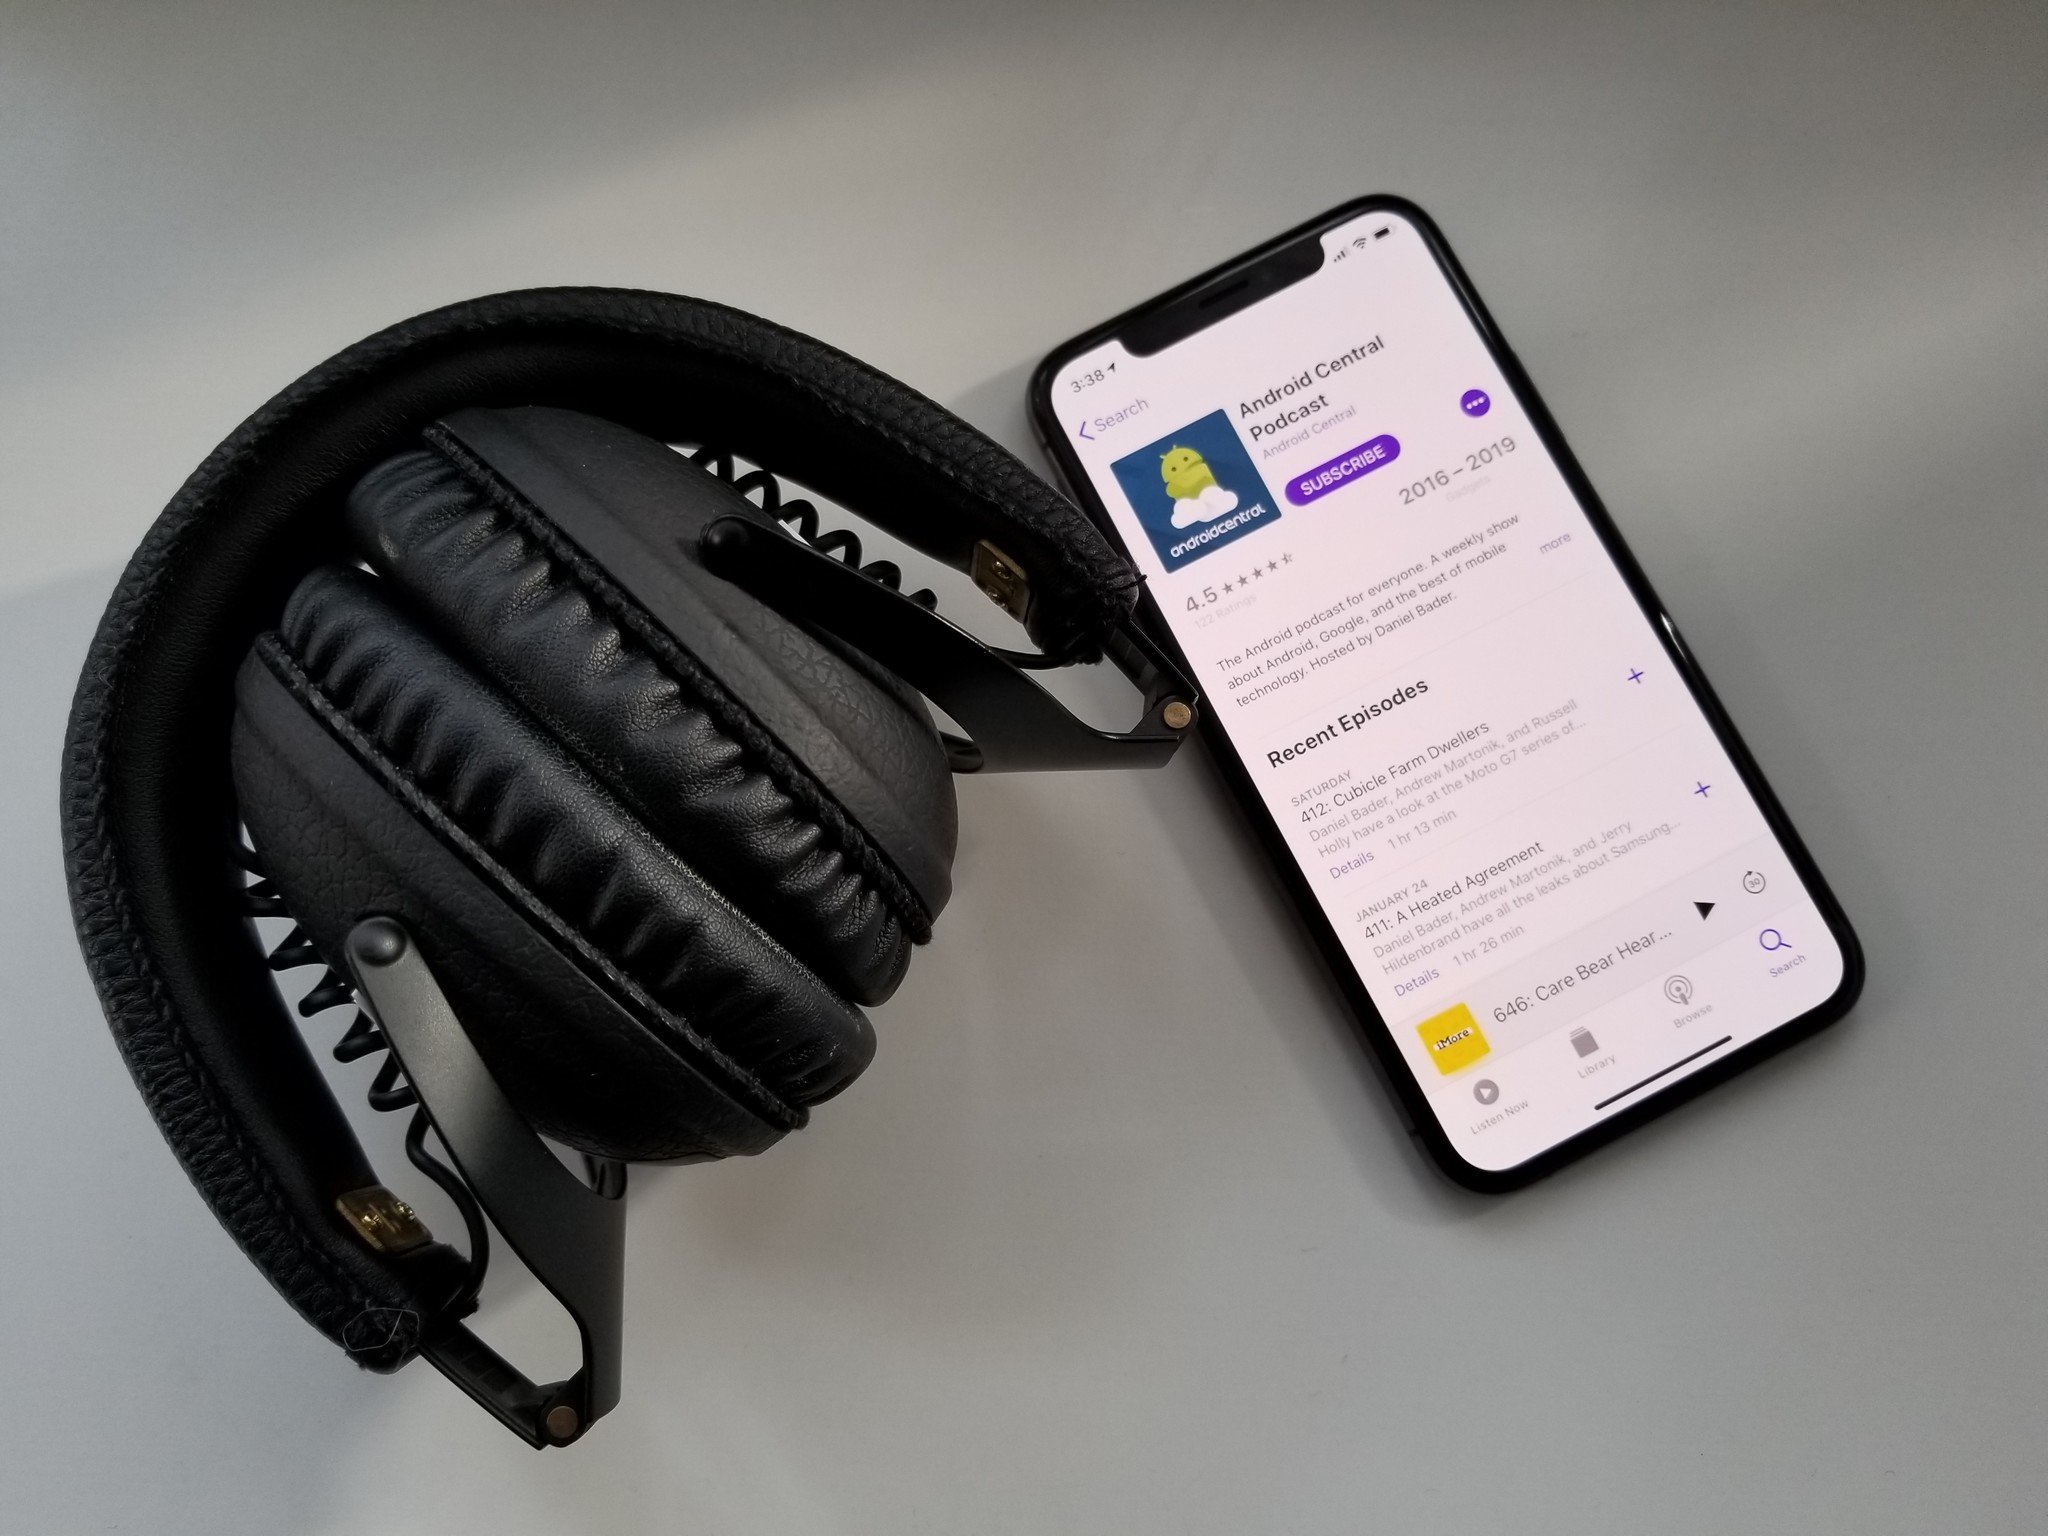 iPhone XS with Apple Podcasts showing Android Central podcast page on a white table next to black headphones